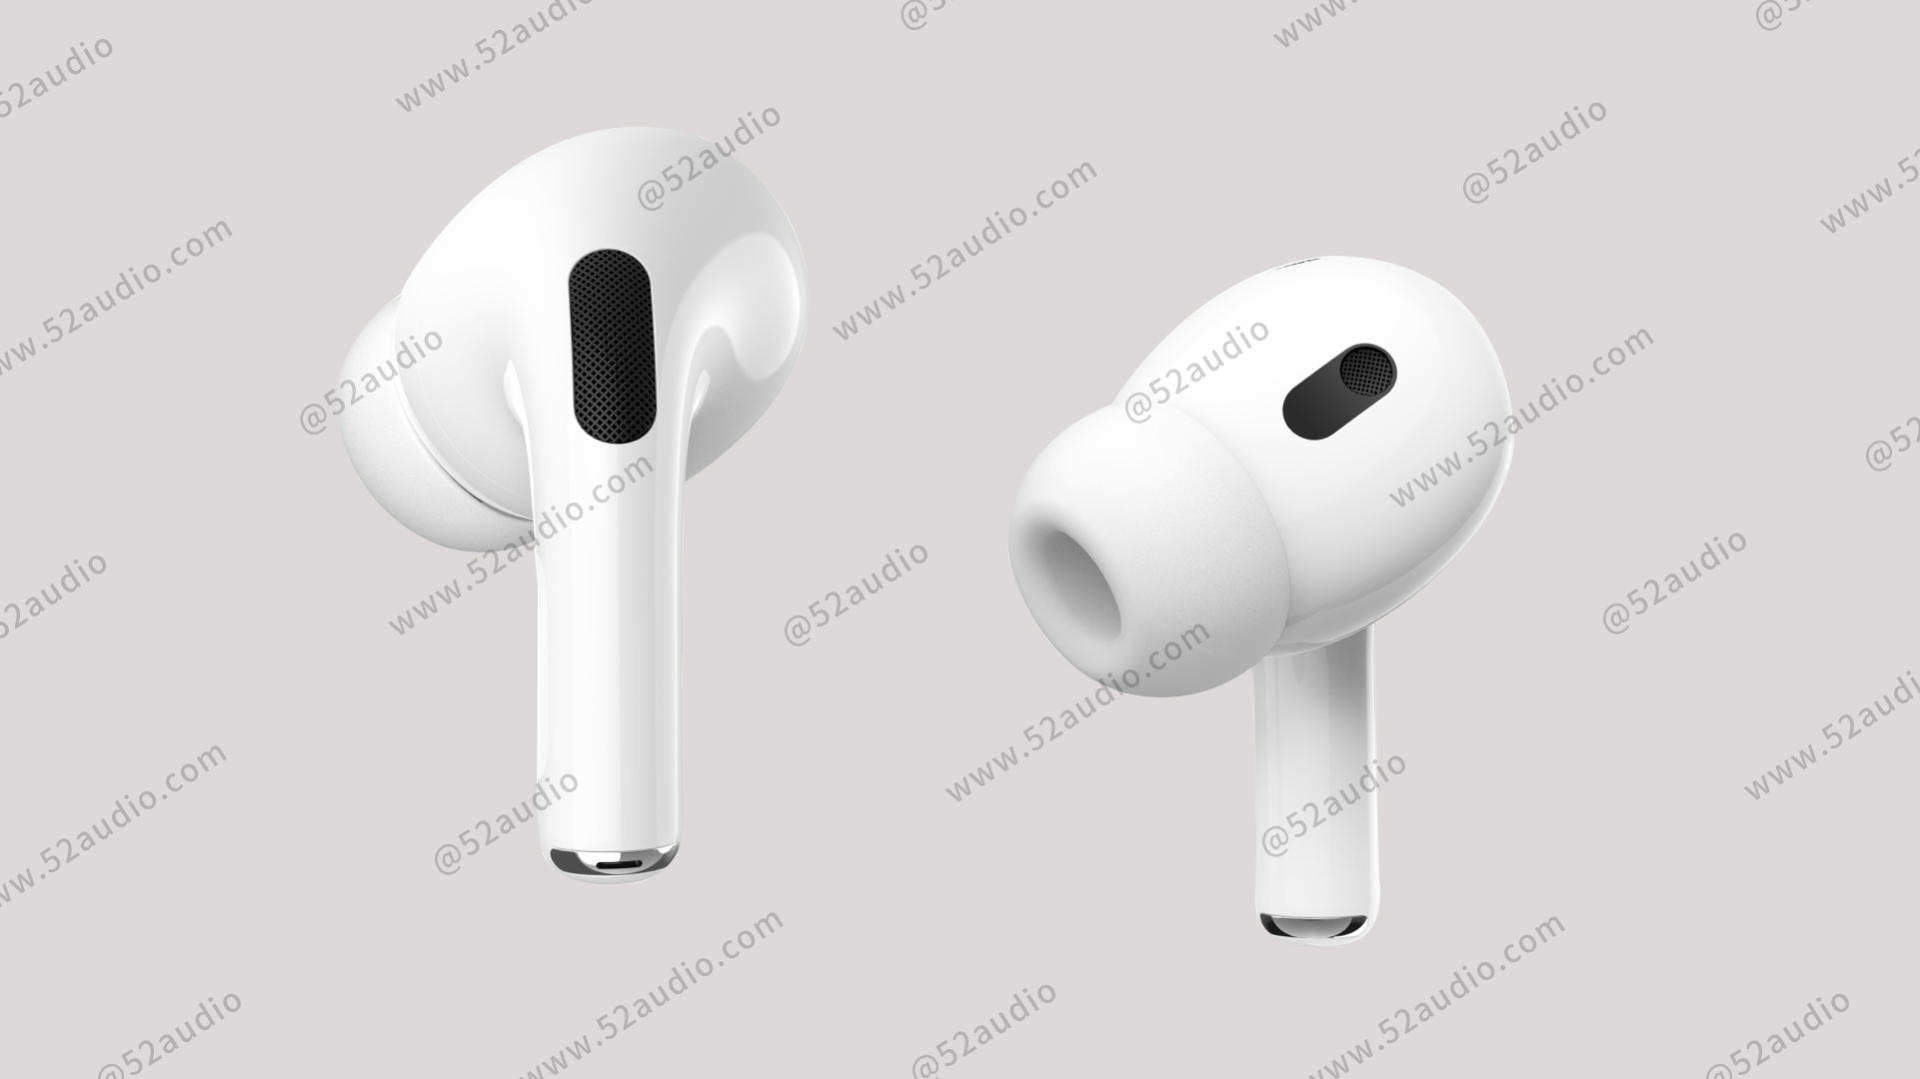 Image of rumored Apple Airpods Pro 2